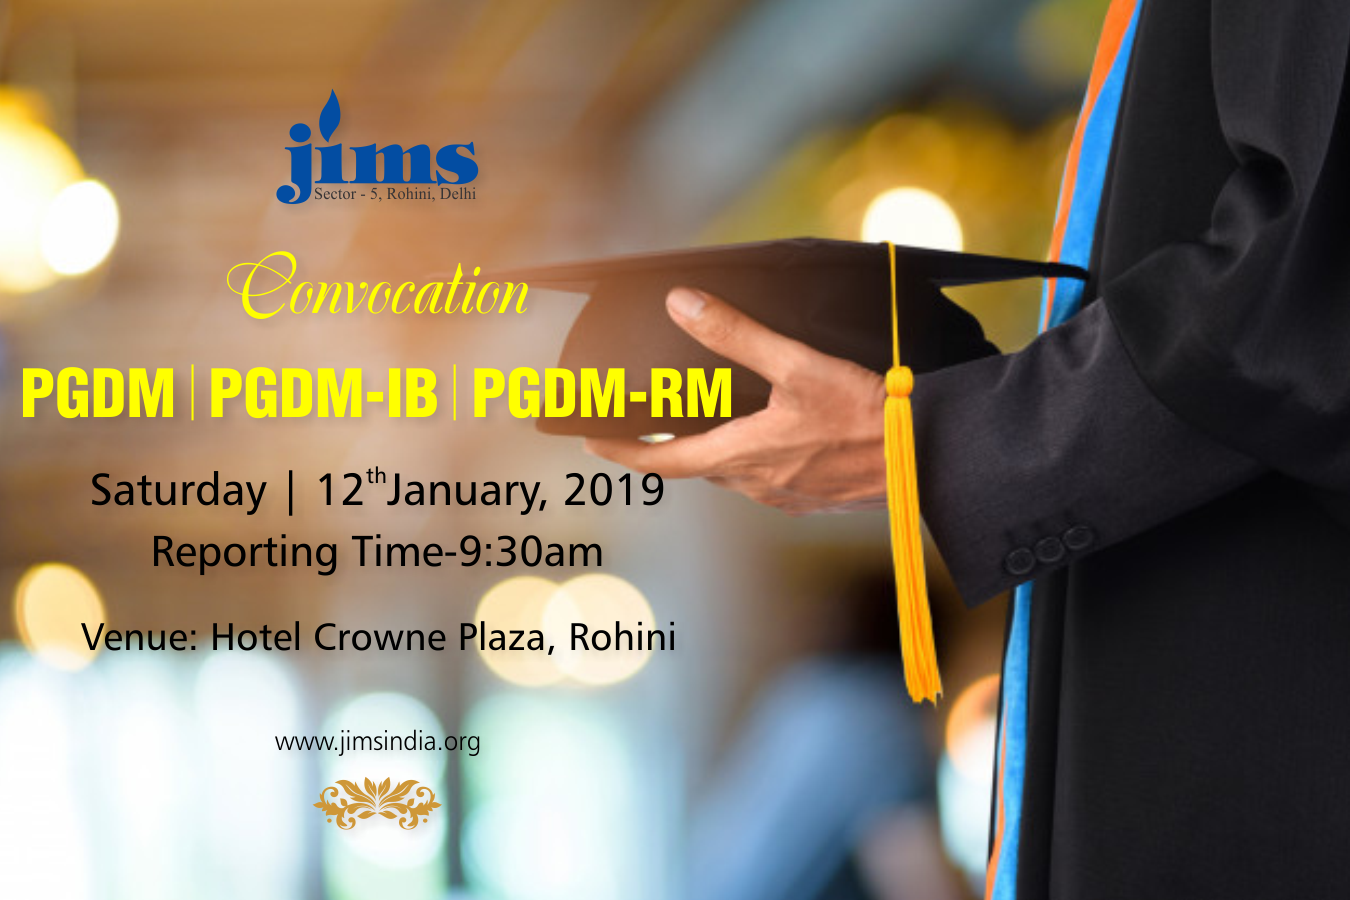 Convocation for PGDM, PGDM-IB & PGDM-RM Batch 2016-2018 on Saturday, 12th January, 2019 9:30 AM Onwards